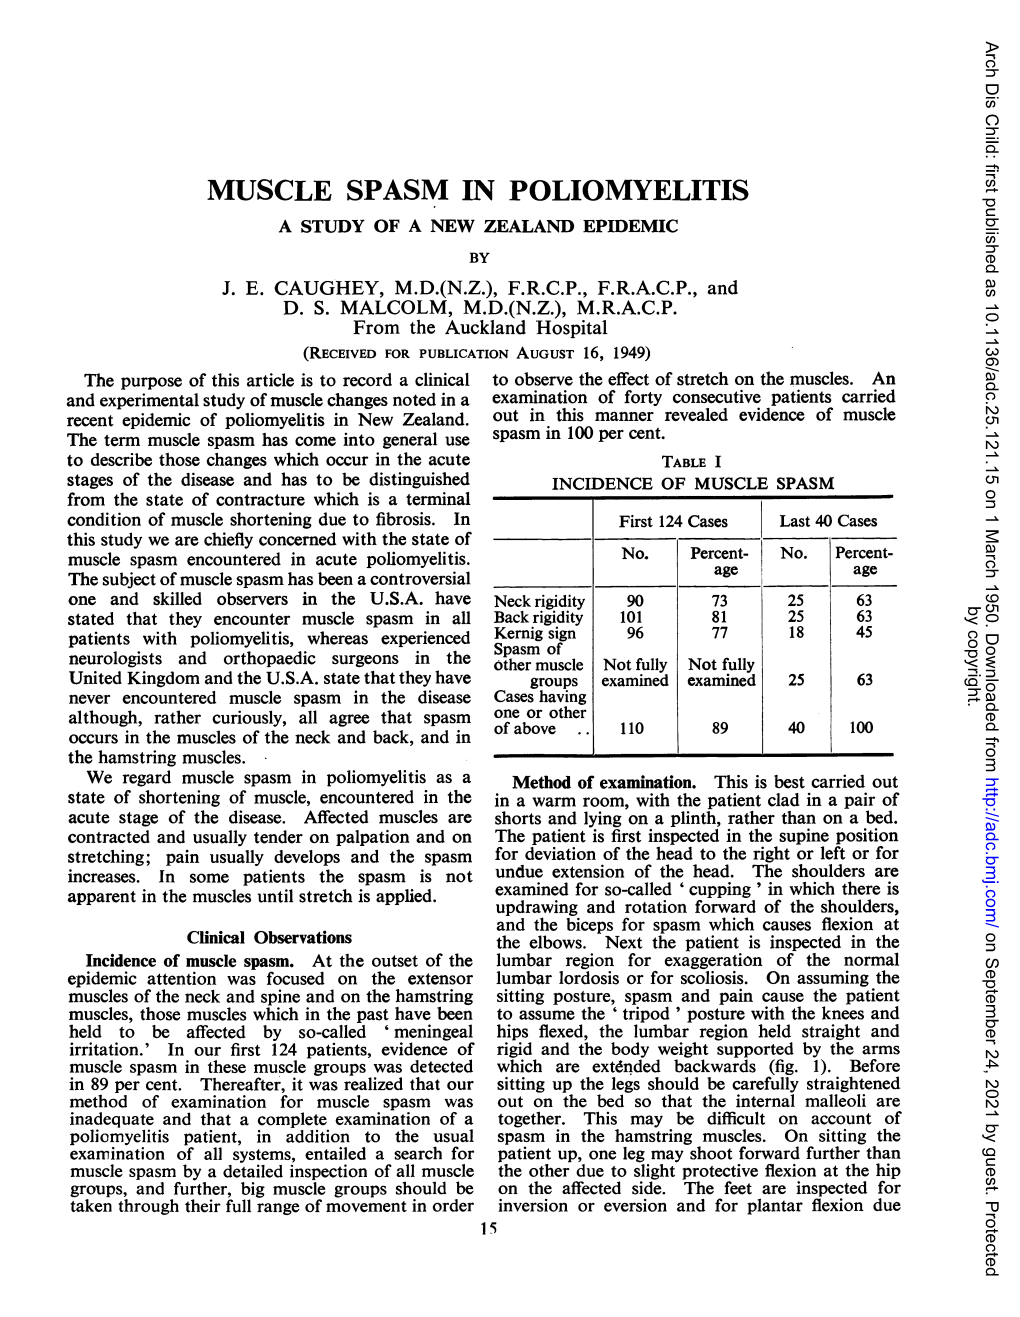 Muscle Spasm in Poliomyelitis a Study of a New Zealand Epidemic by J